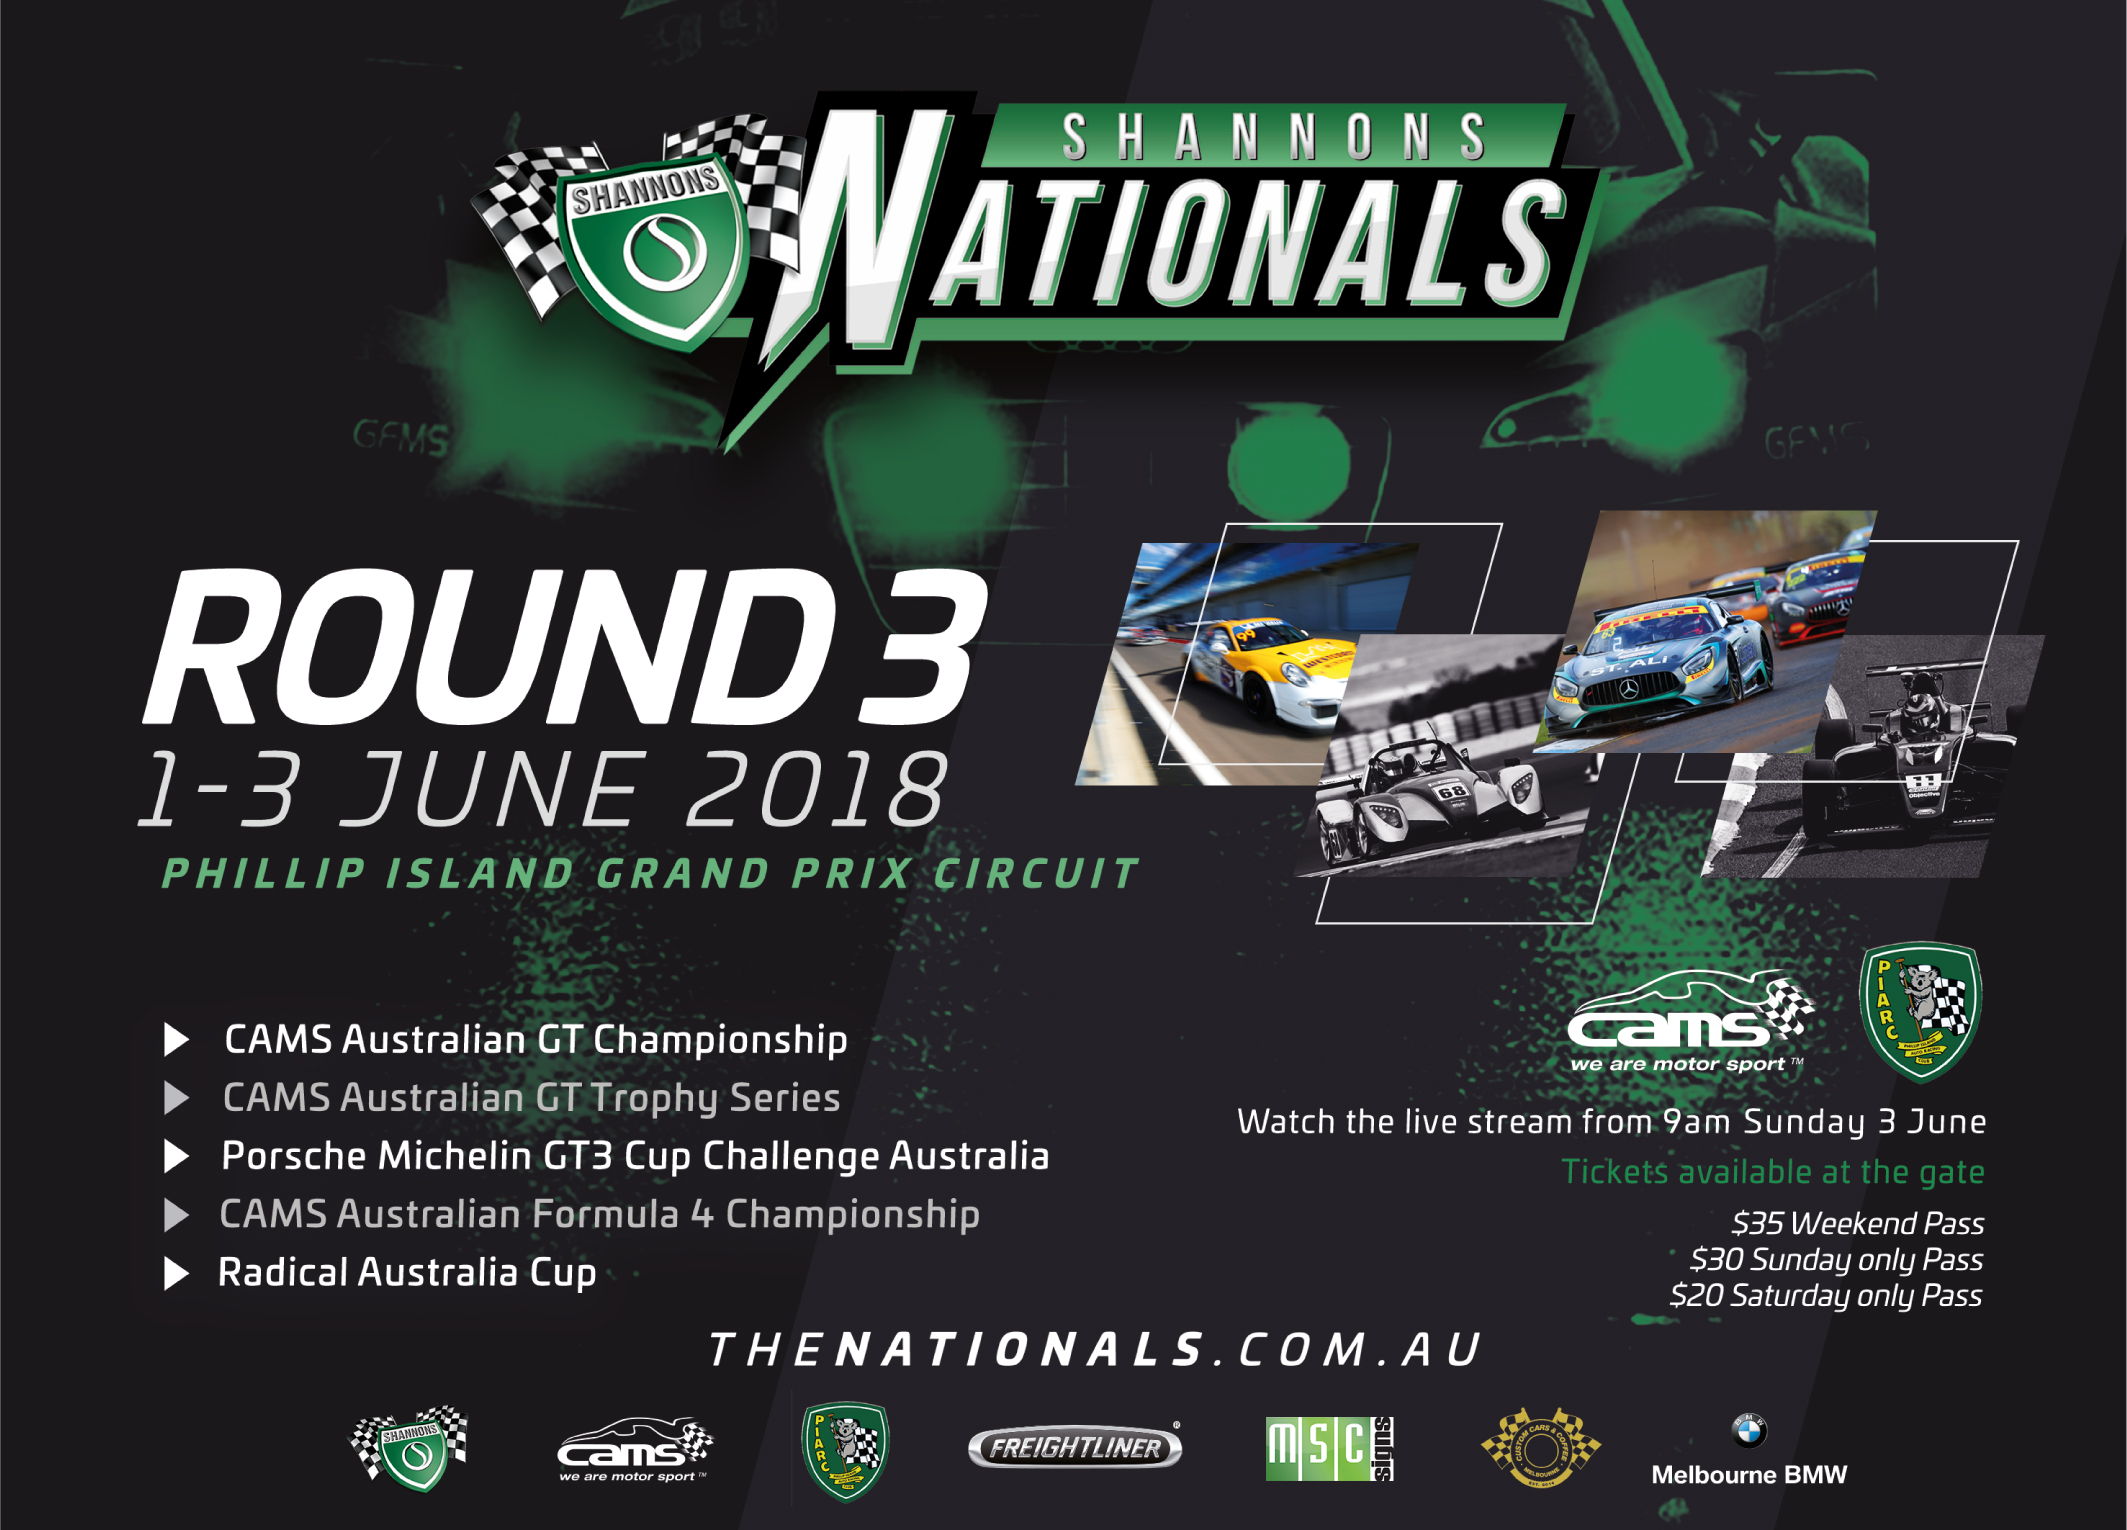 Shannons Nationals 2018 Rnd 3 Poster Email Version